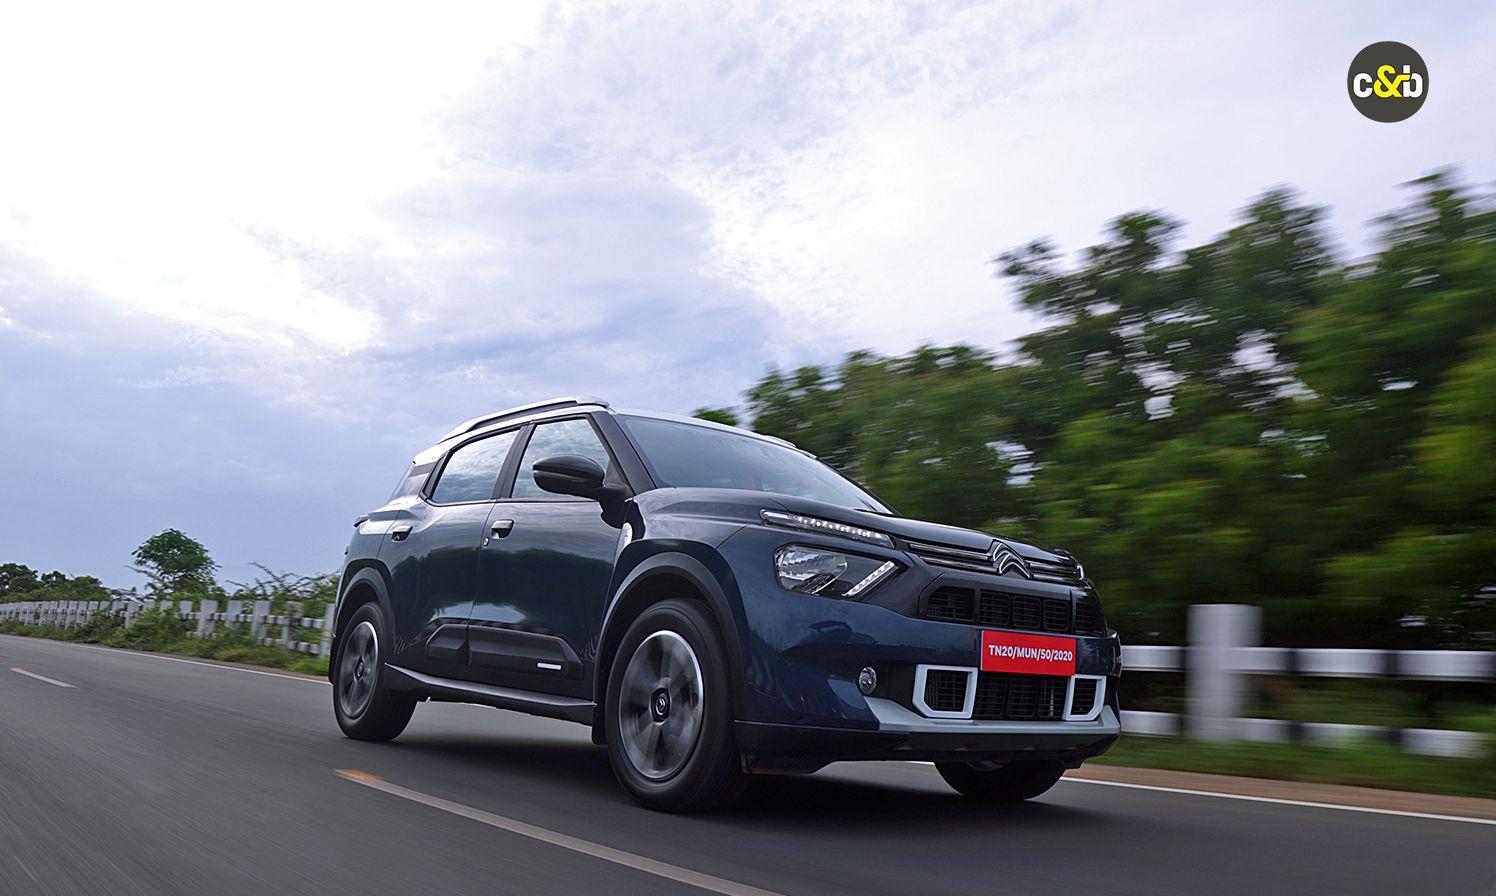 Bookings for the new Citroen C3 Aircross have opened for a token of Rs. 25,000. It will be launched at an introductory starting price of Rs. 9.99 lakh (ex-showroom). 